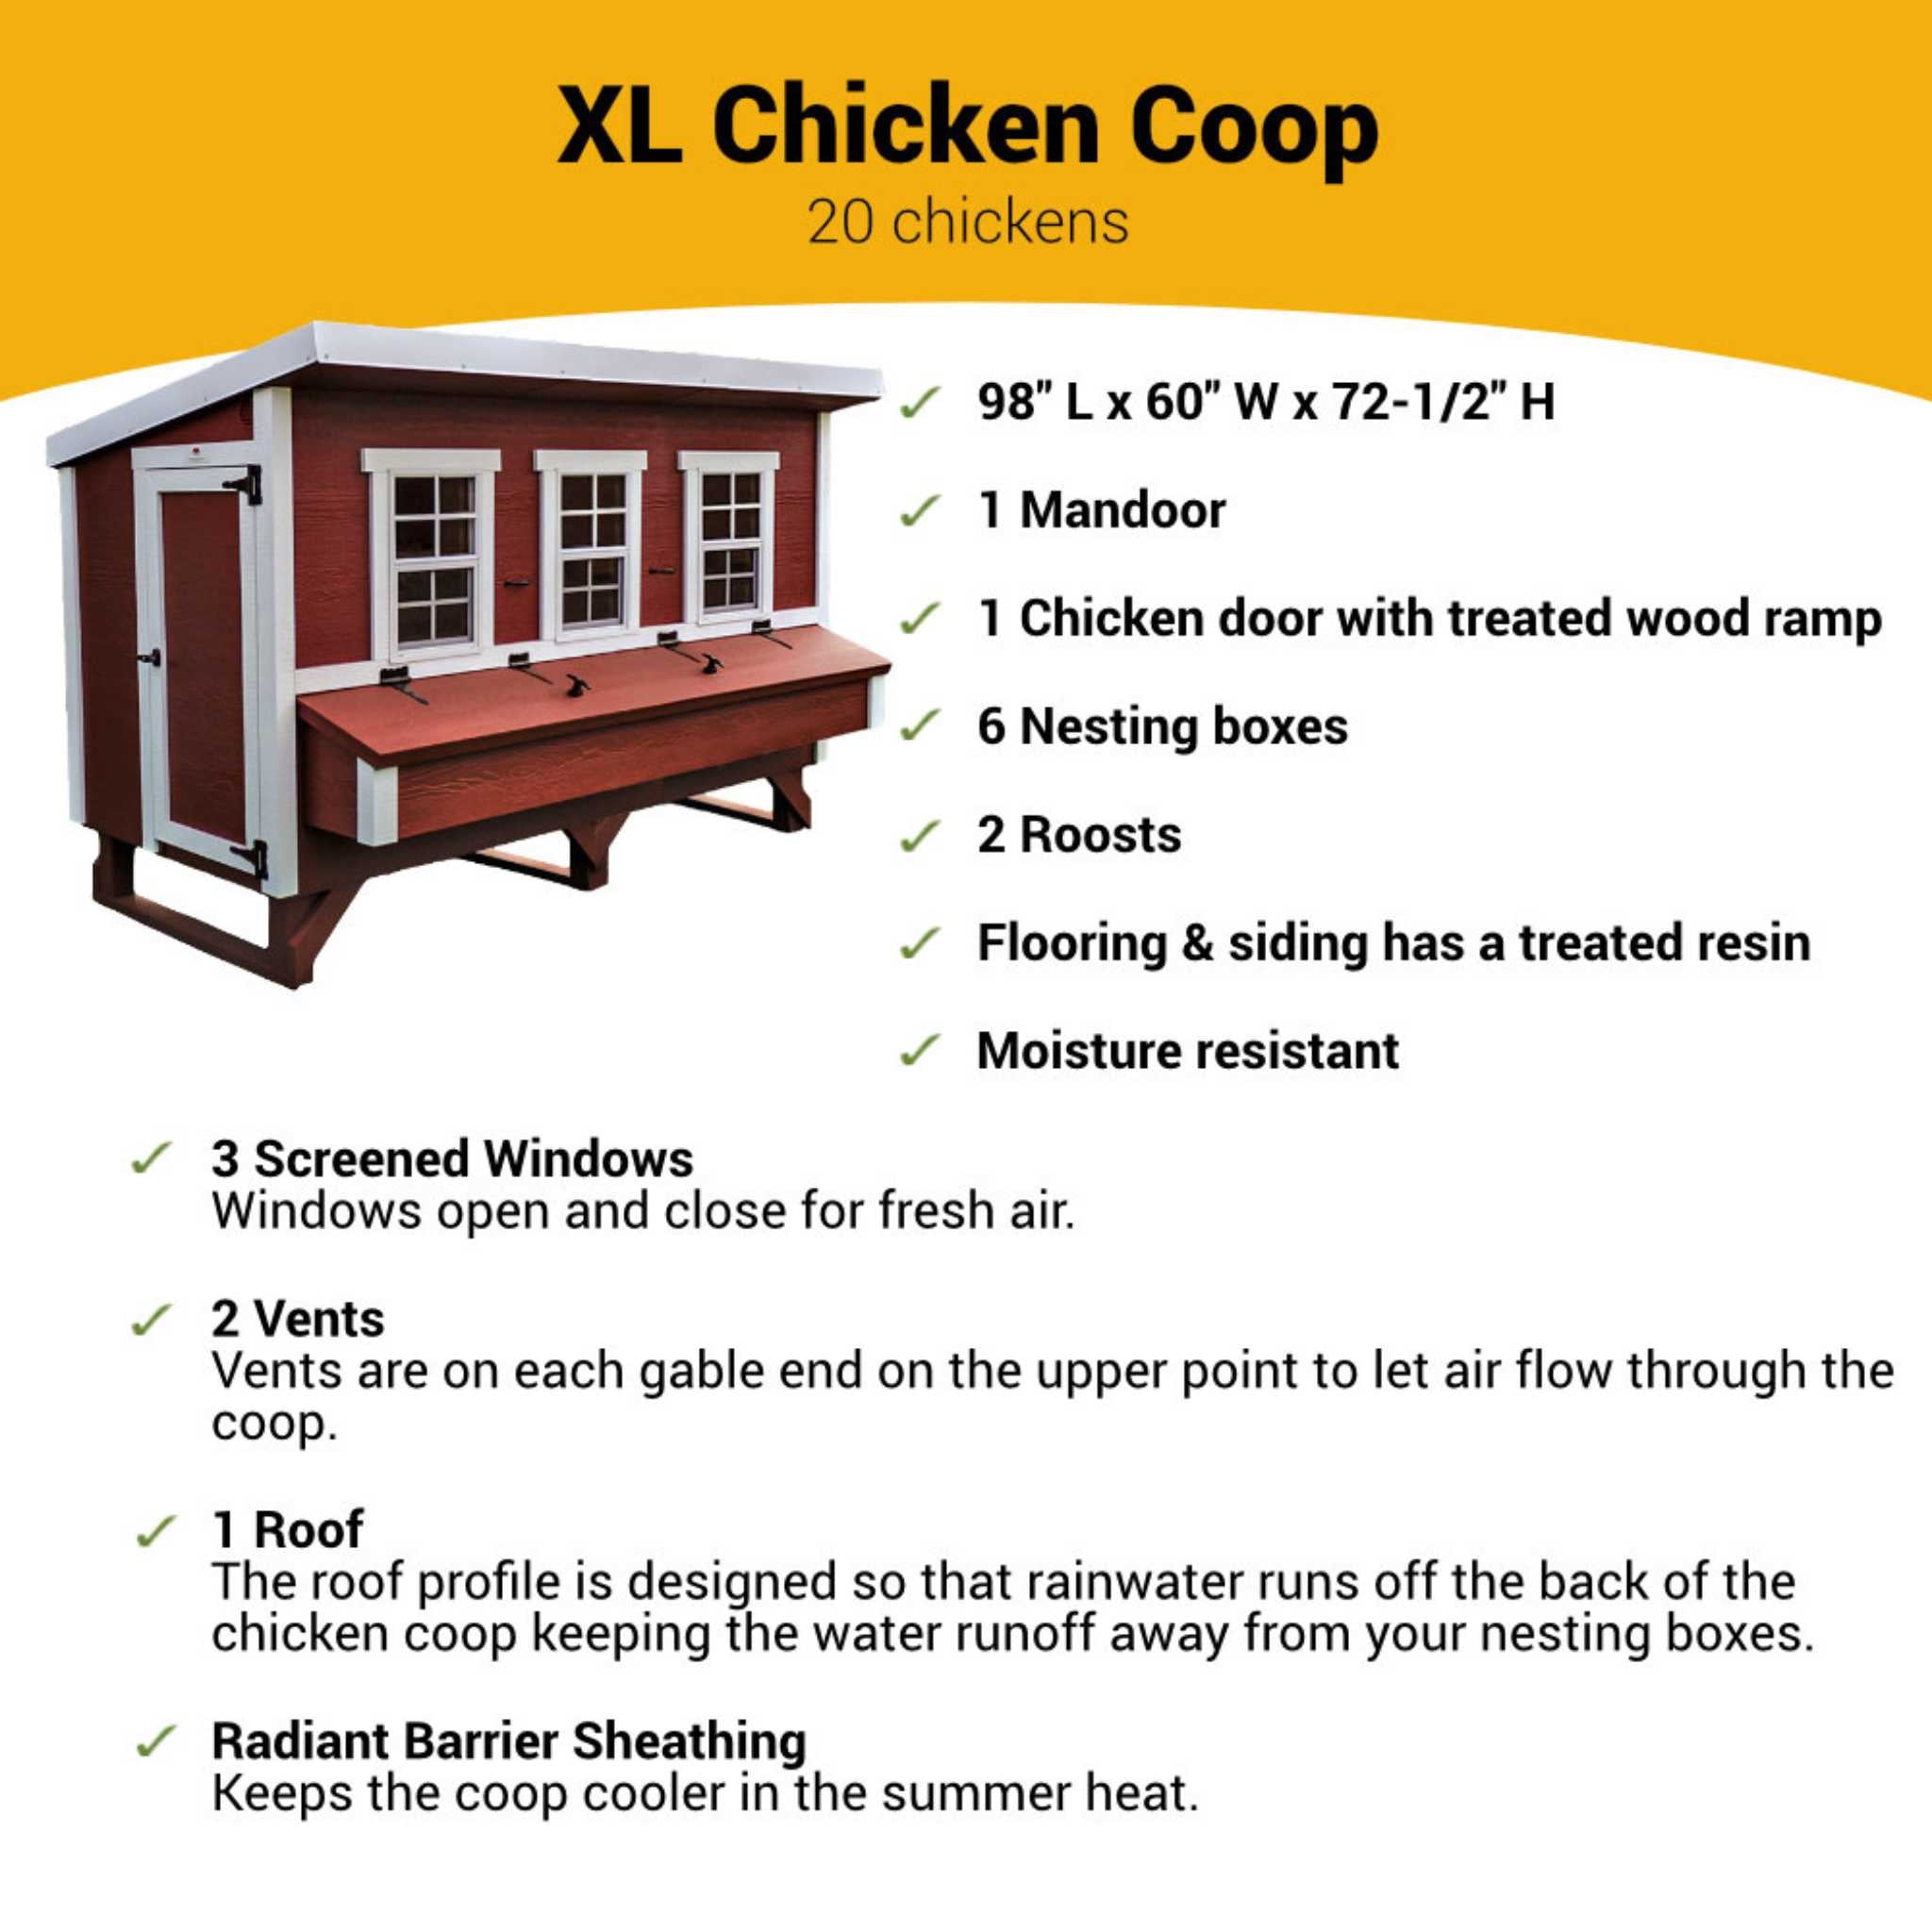 Hatching Time OverEZ XL chicken coop holds 20 chickens. Infographic has dimensions of 98 inches long, 60 inches wide, 72.5 inches high.